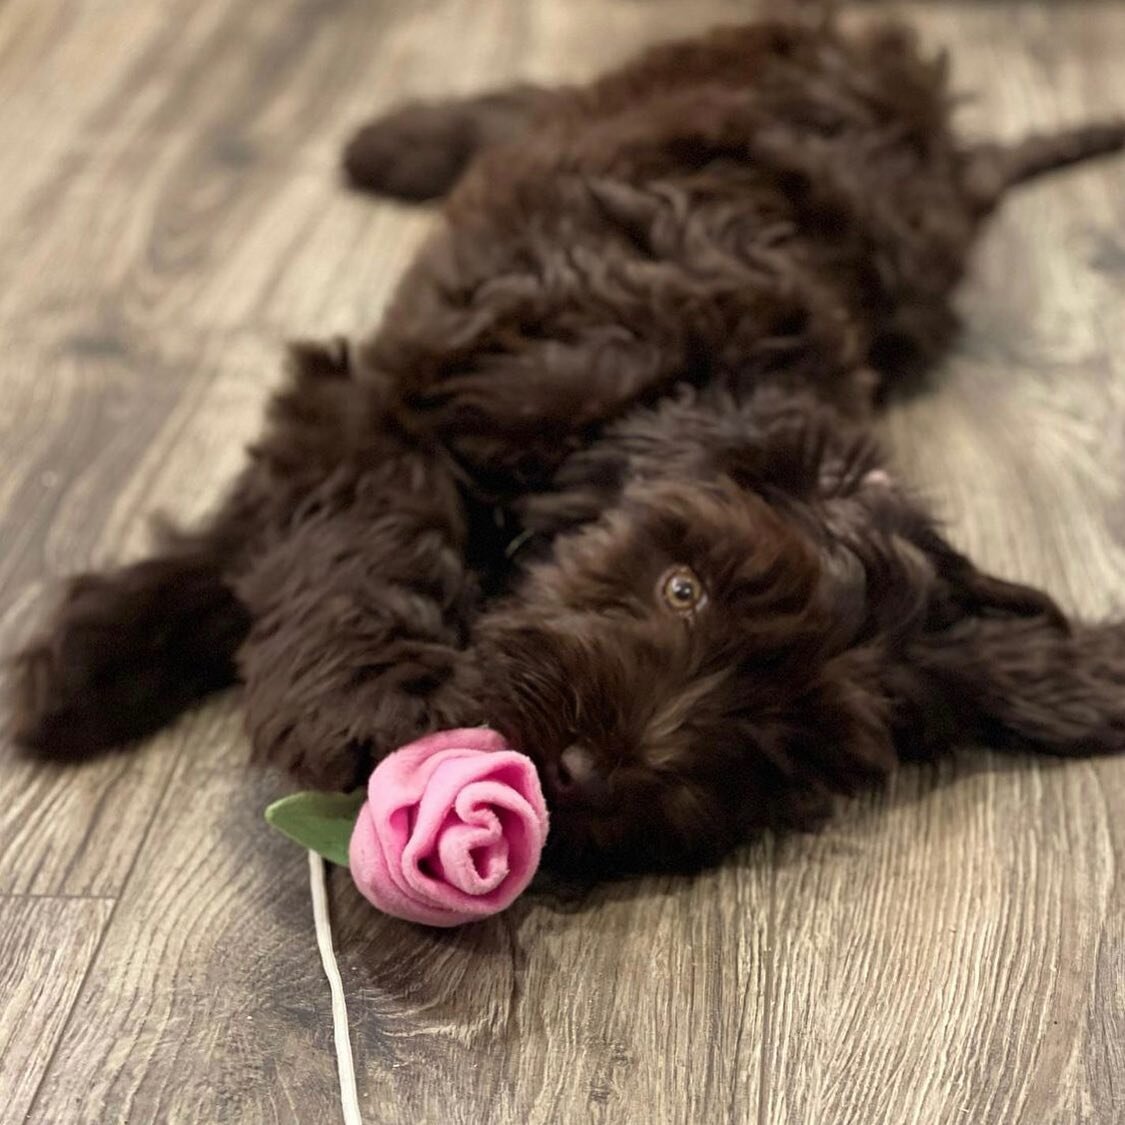 🌸Meet Ellie!🌸

We have a rare opportunity to own a fully trained adult Australian labradoodle. Ellie is a medium 2 year old Australian labradoodle with a wavy chocolate non-shedding fleece coat. This sweet girl is retiring from our program, and we 